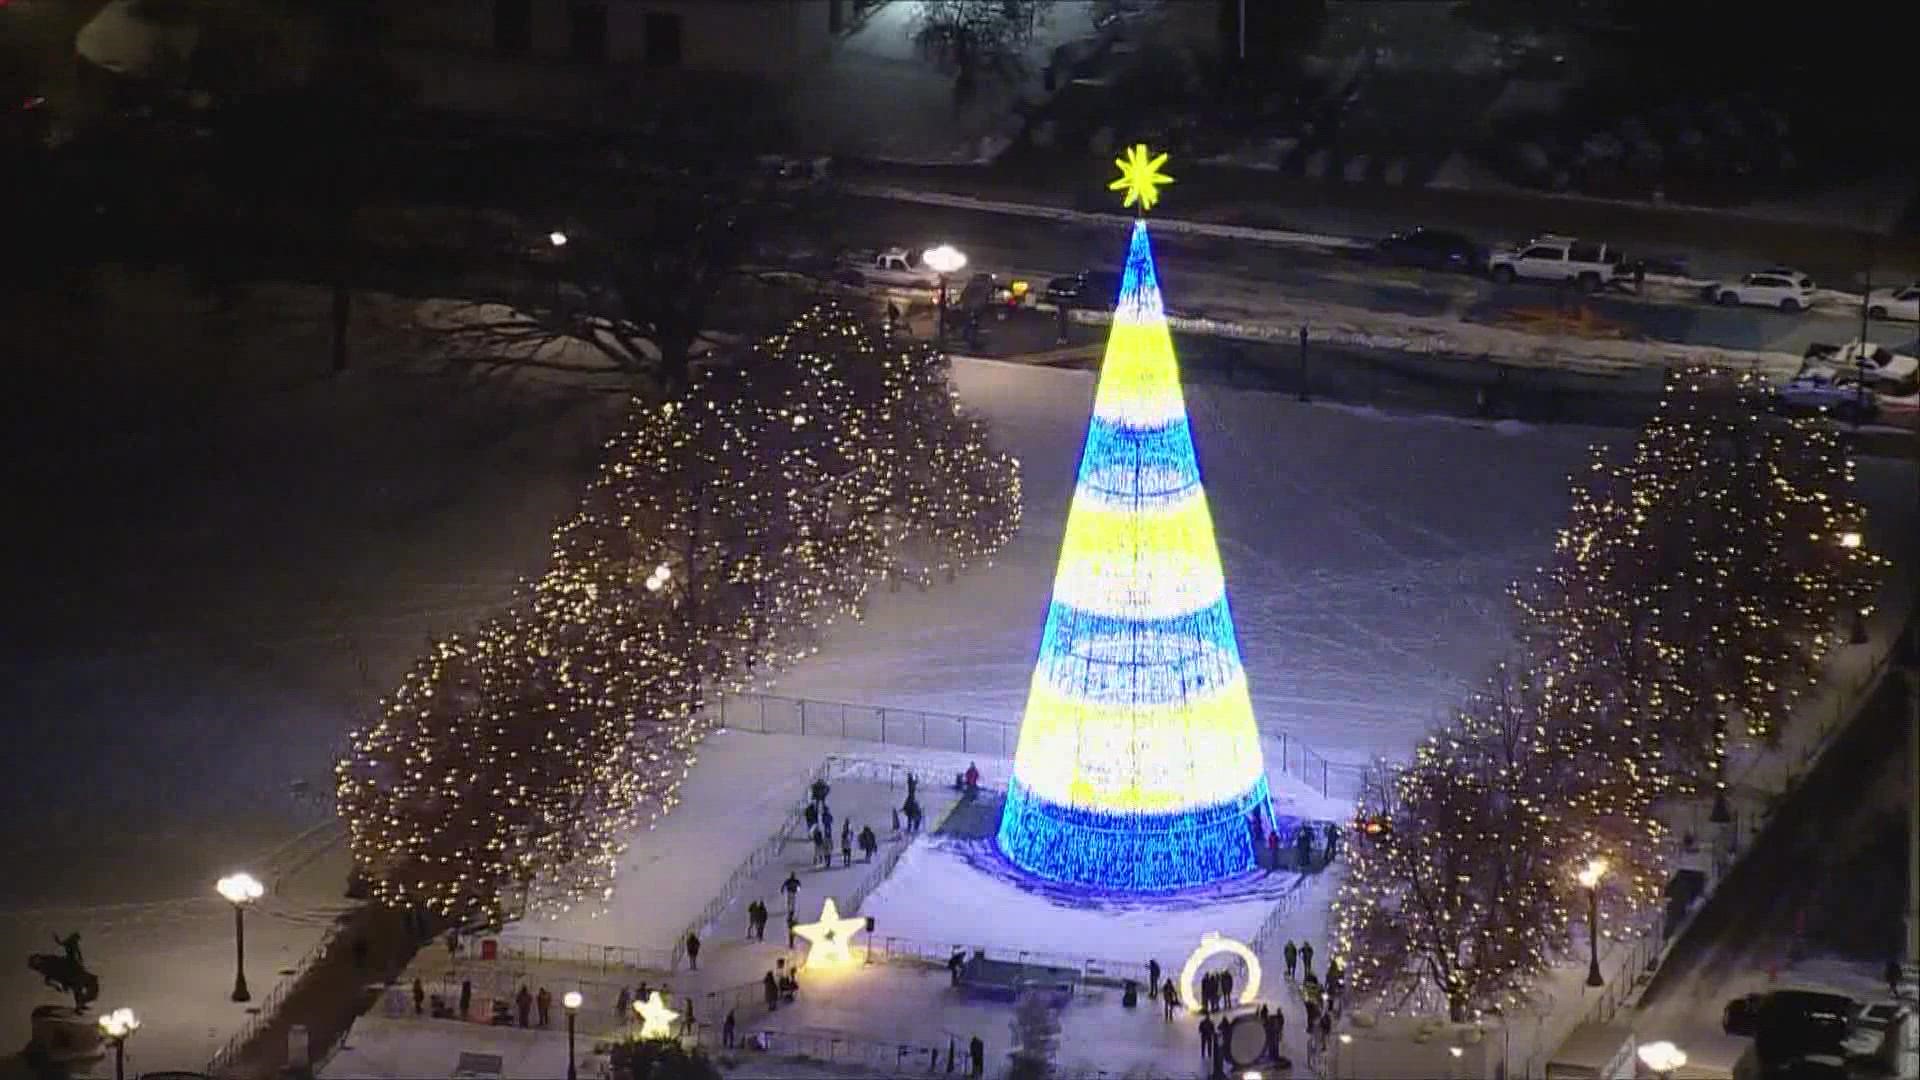 The 110-foot-tall lighted tree was scheduled to be open through the end of the year.